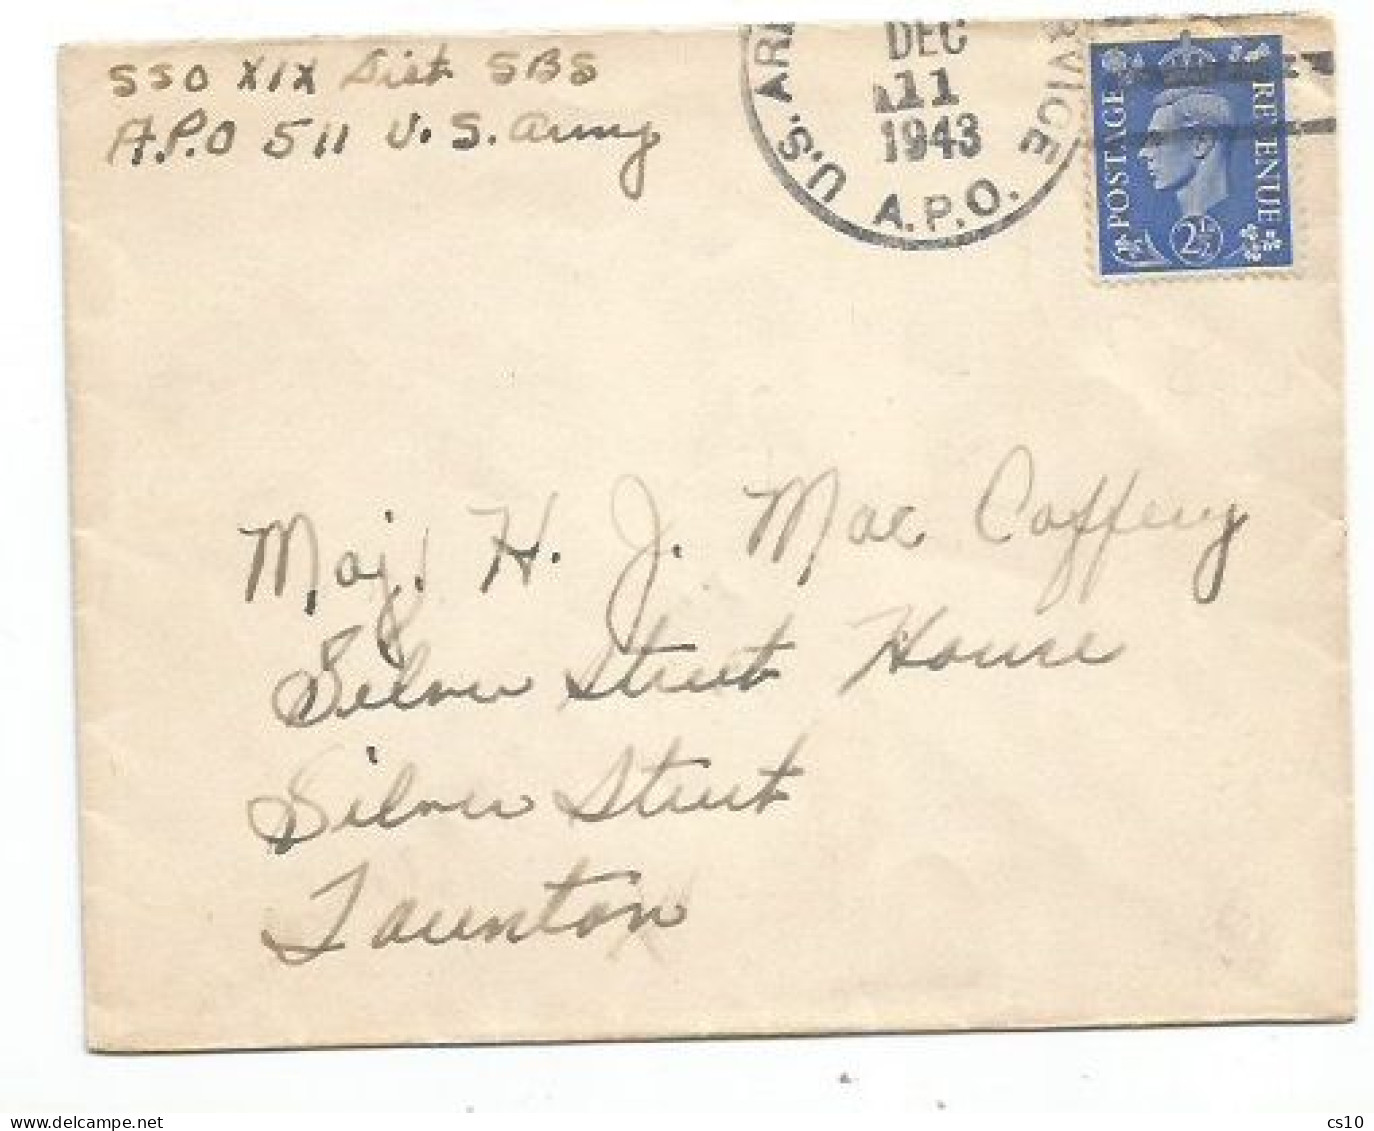 UK Britain KG6 2d5 Solo Franking CV APO US Army #511 On 11dec1943 To Launton UK - Covers & Documents